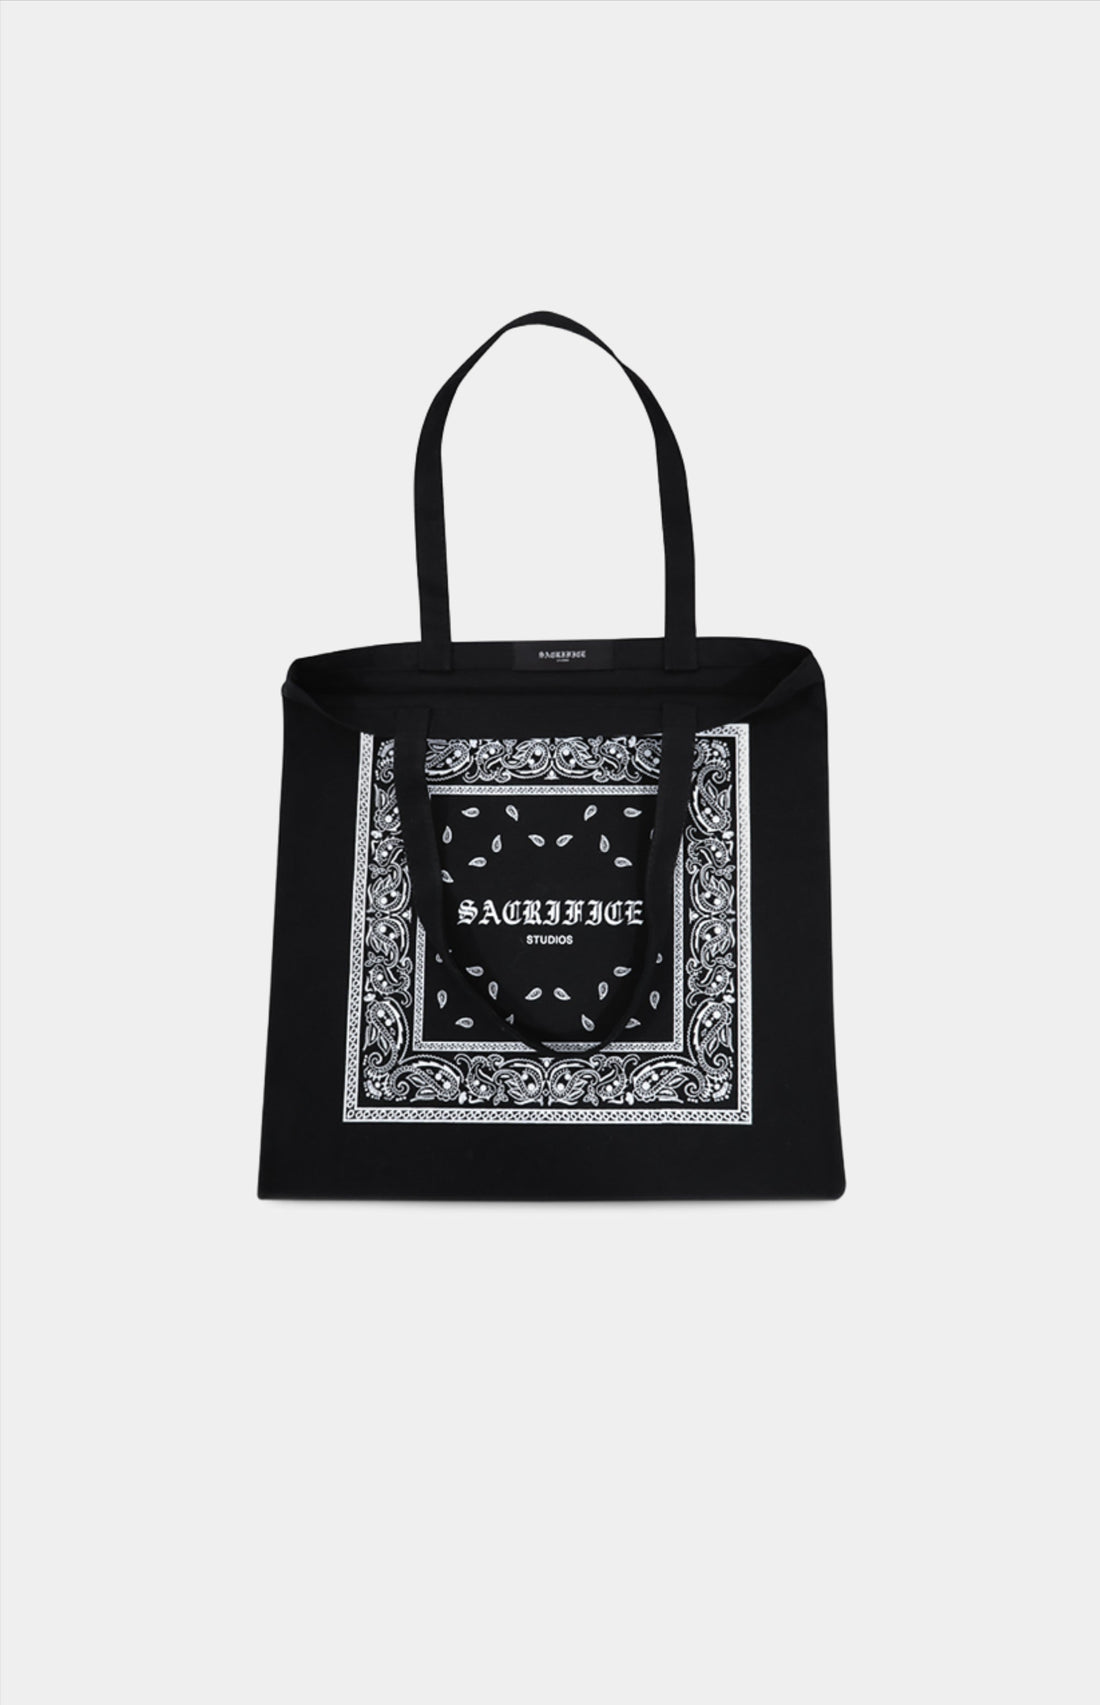 A sophisticated paisley design tote bag with ample space in a 55x55cm size, crafted with expertise in Portugal using durable materials. Machine washable for easy maintenance and a stylish accessory for daily life, shopping, or travel